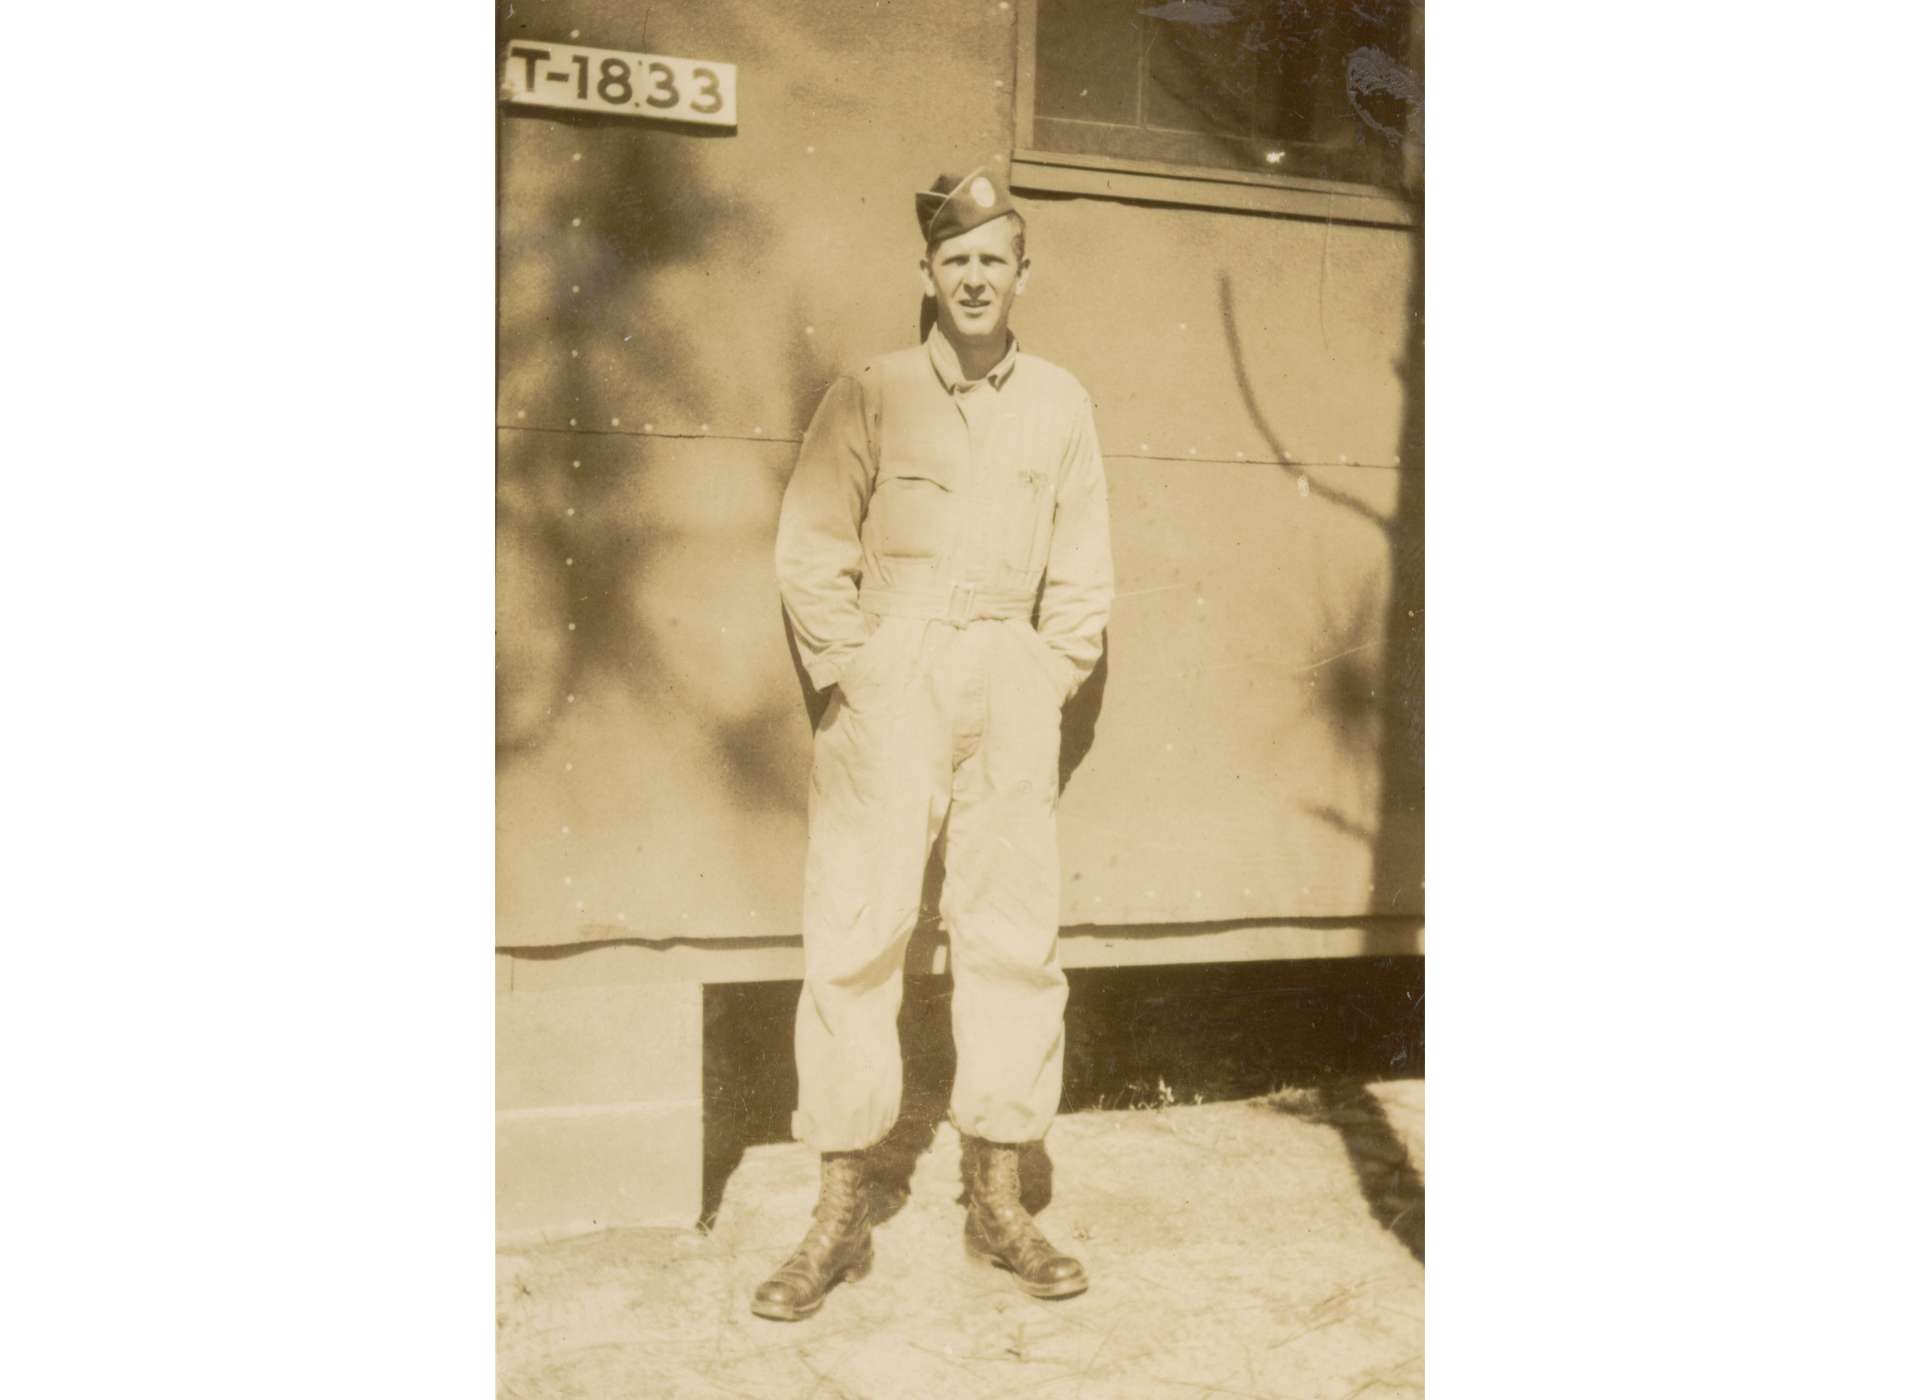 Blakey at Camp Mackall, North Caroline in 1943. Image courtesy of the National Archives, from the collection of The National WWII Museum.